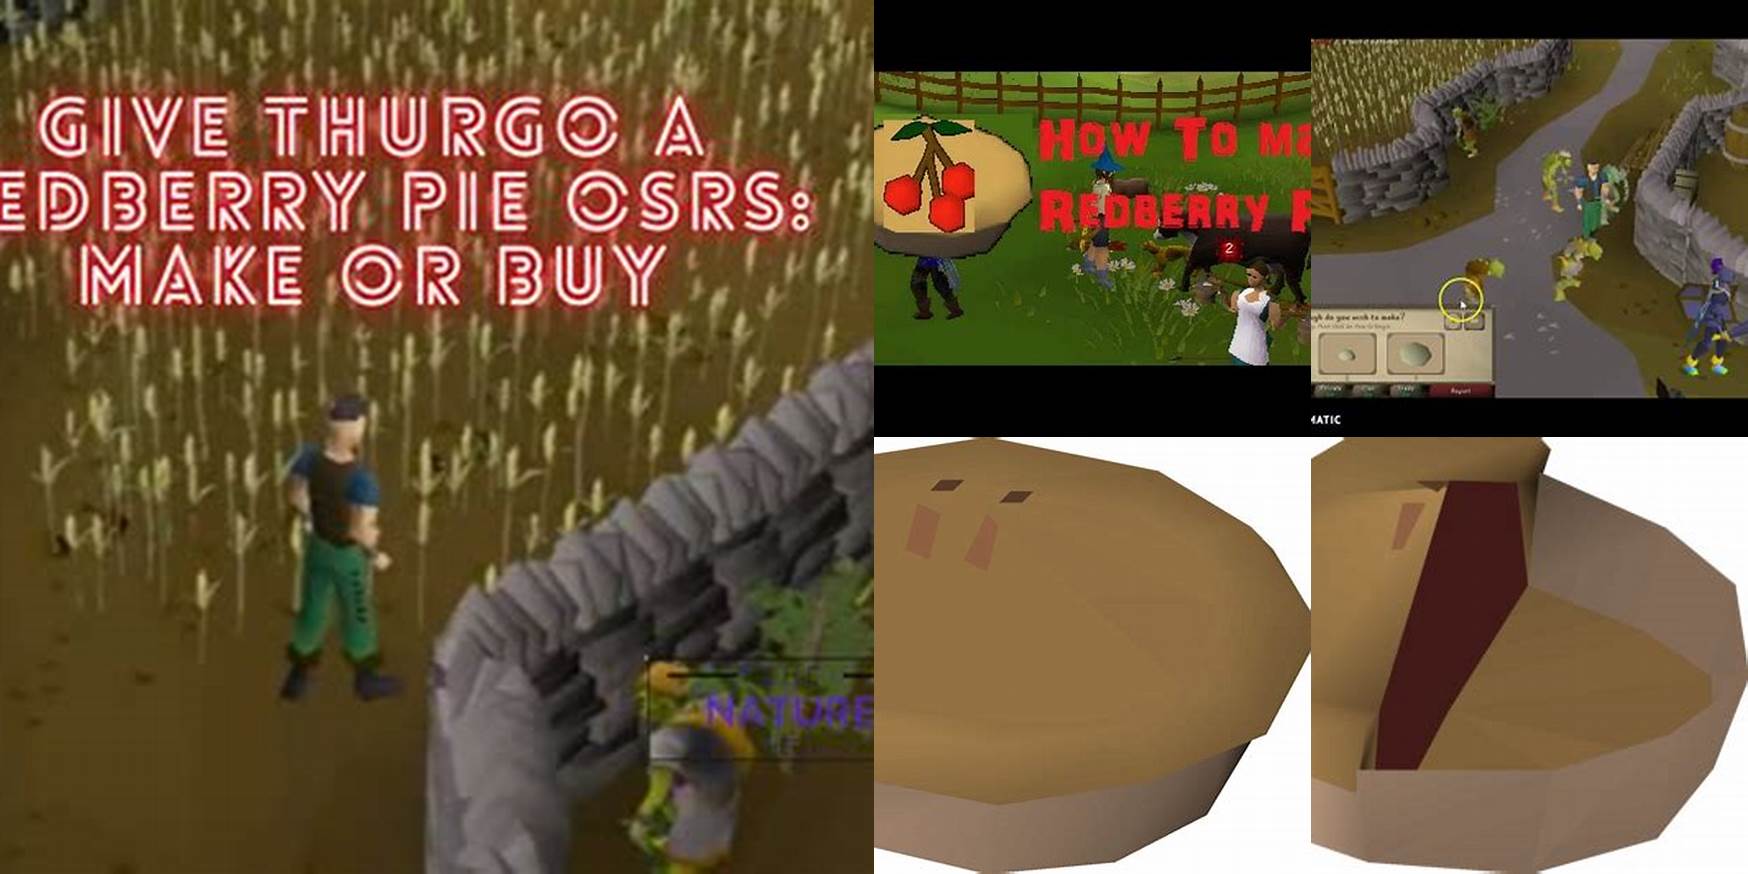 How To Make Redberry Pie Osrs